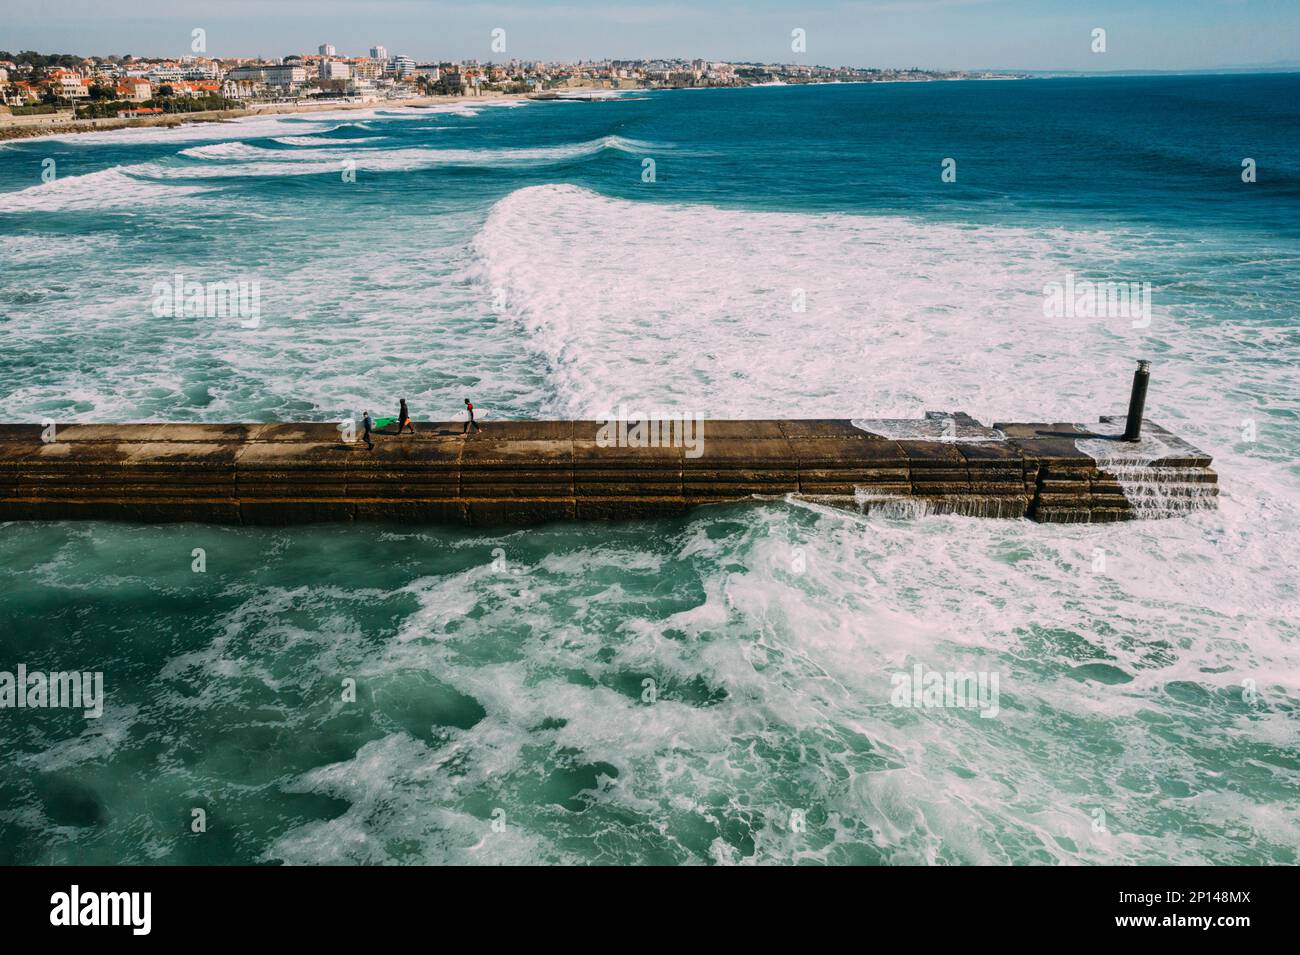 Surfers carrying their boards at a pier in Cascais, Portugal with giant swell visible Stock Photo